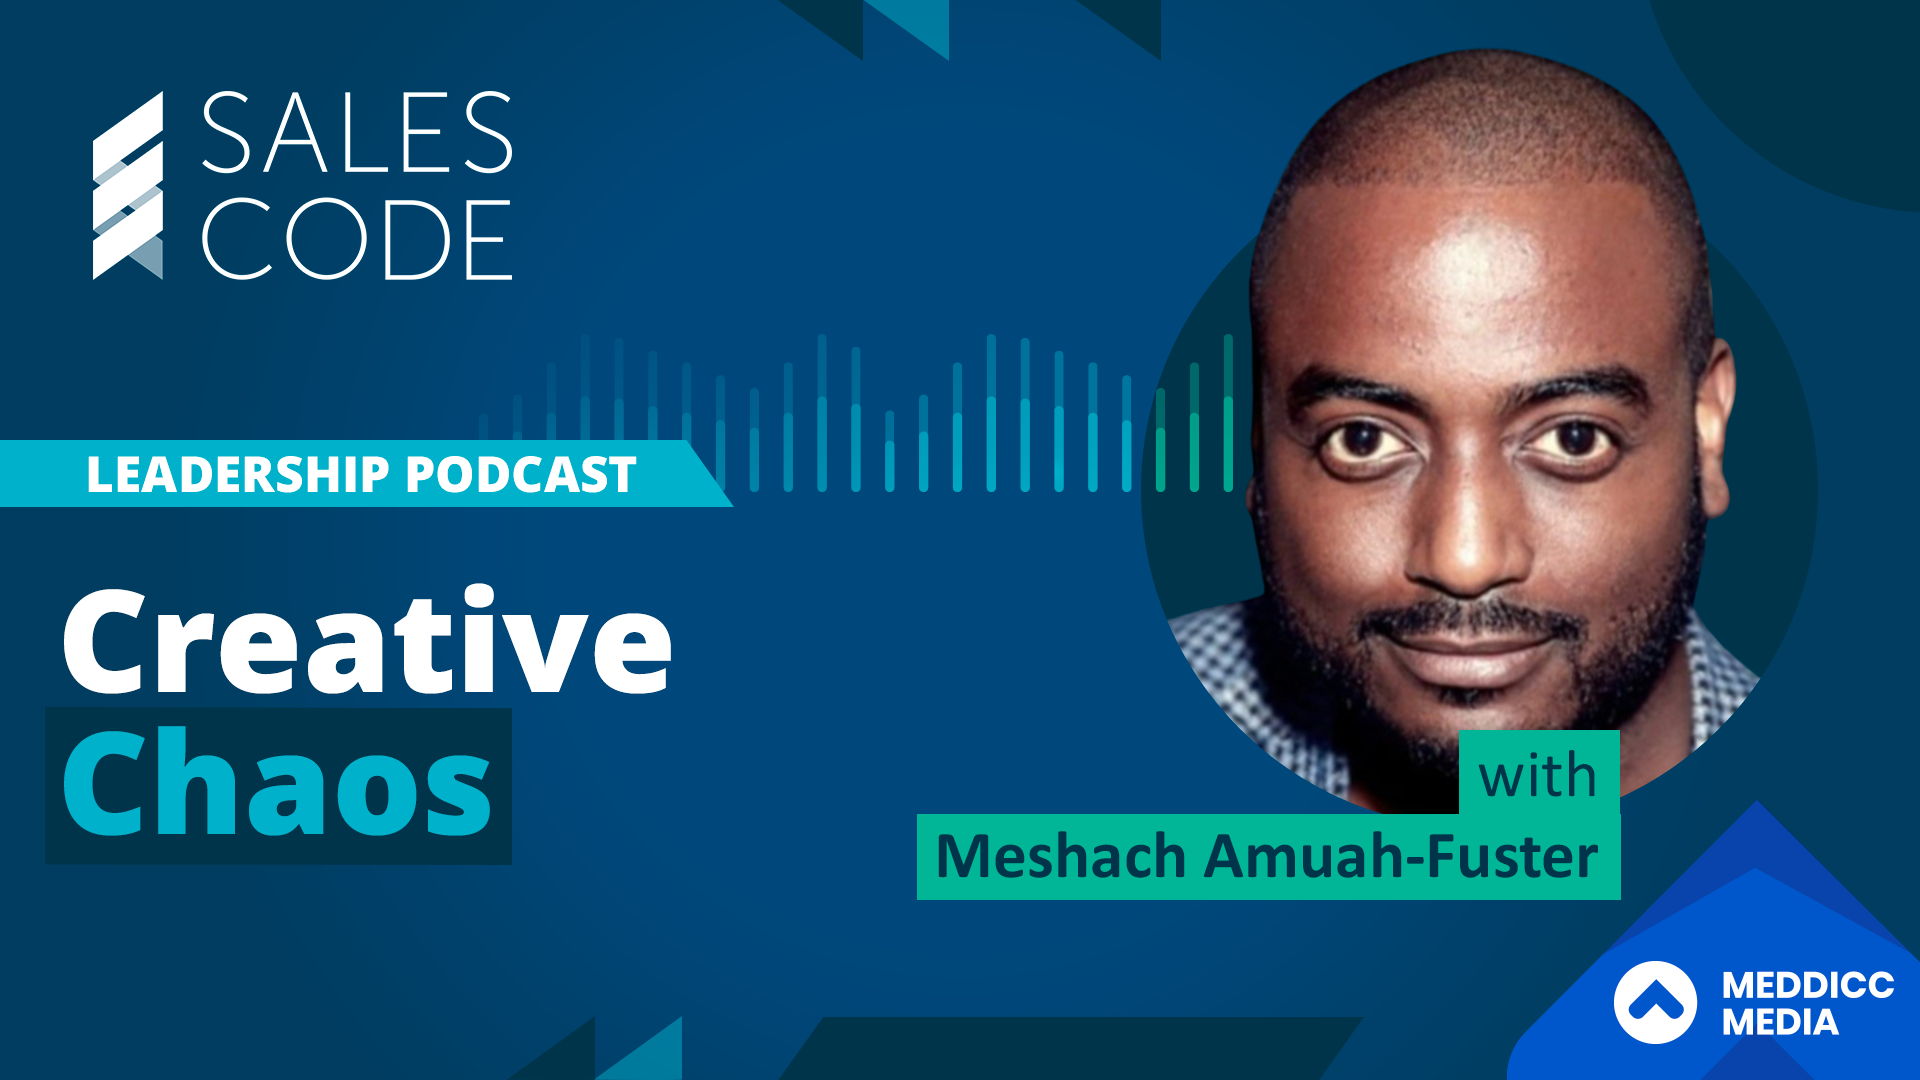 Sales Code: Creative Chaos With Meshach Amuah-Fuster